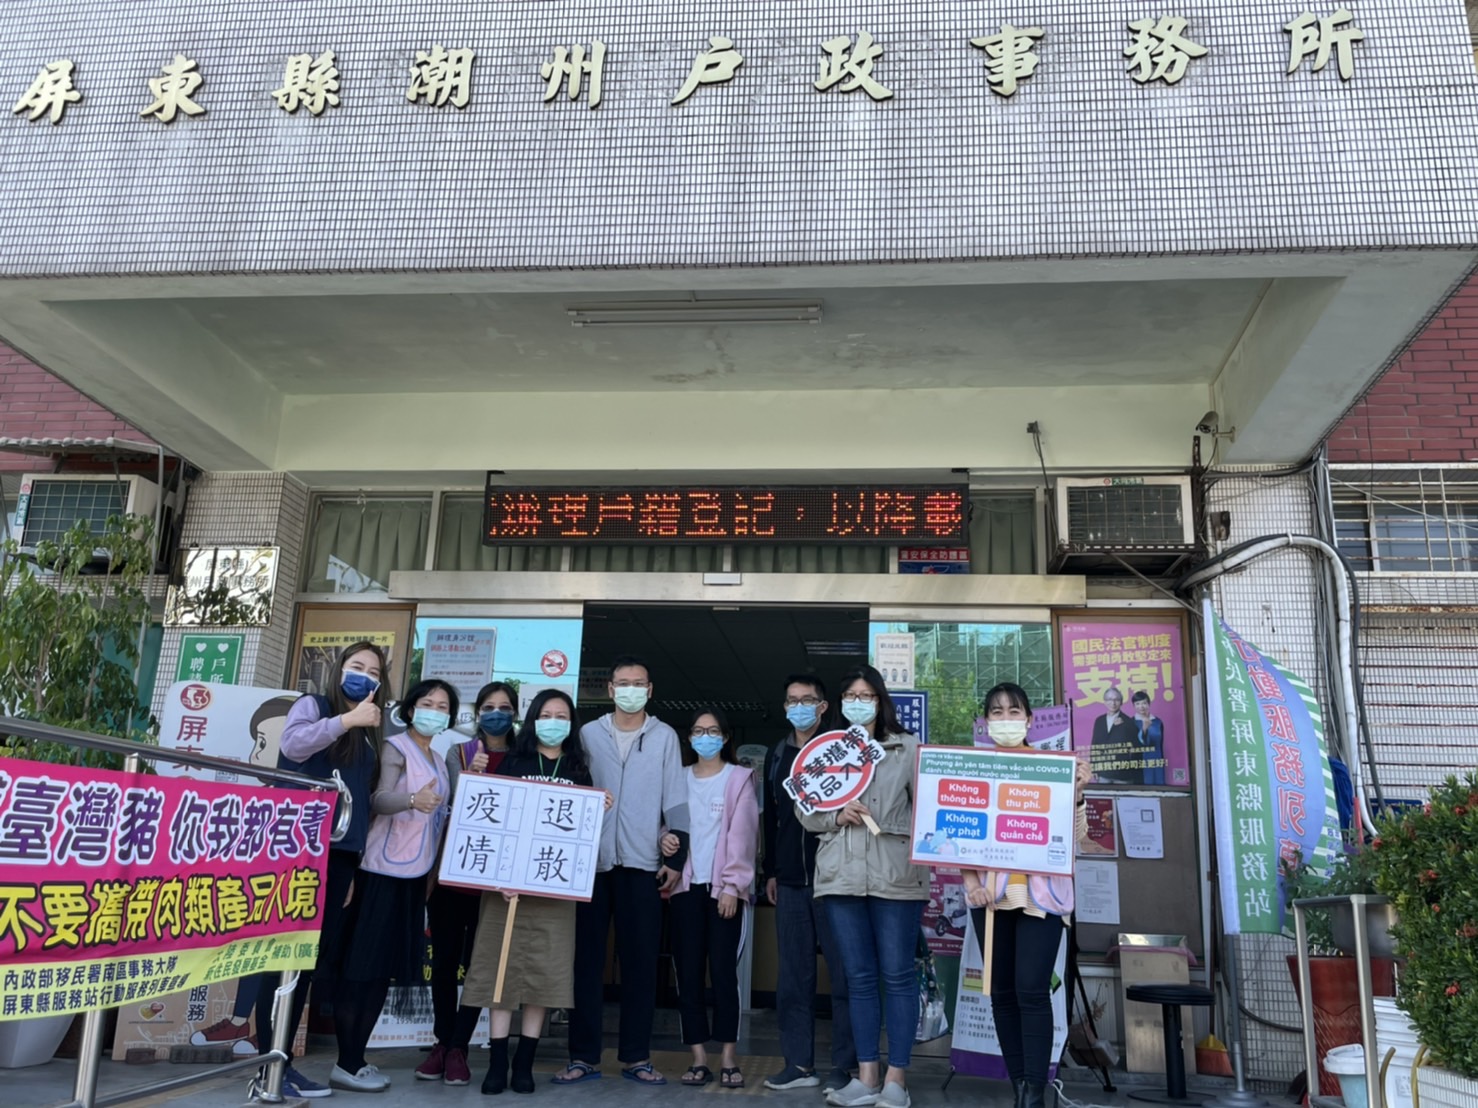 NIA collaborates with Pingtung County Chaozhou Township Office to promote “Carefree Covid-19 Vaccination Program”. (Photo / Provided by Pingtung County Service Center)